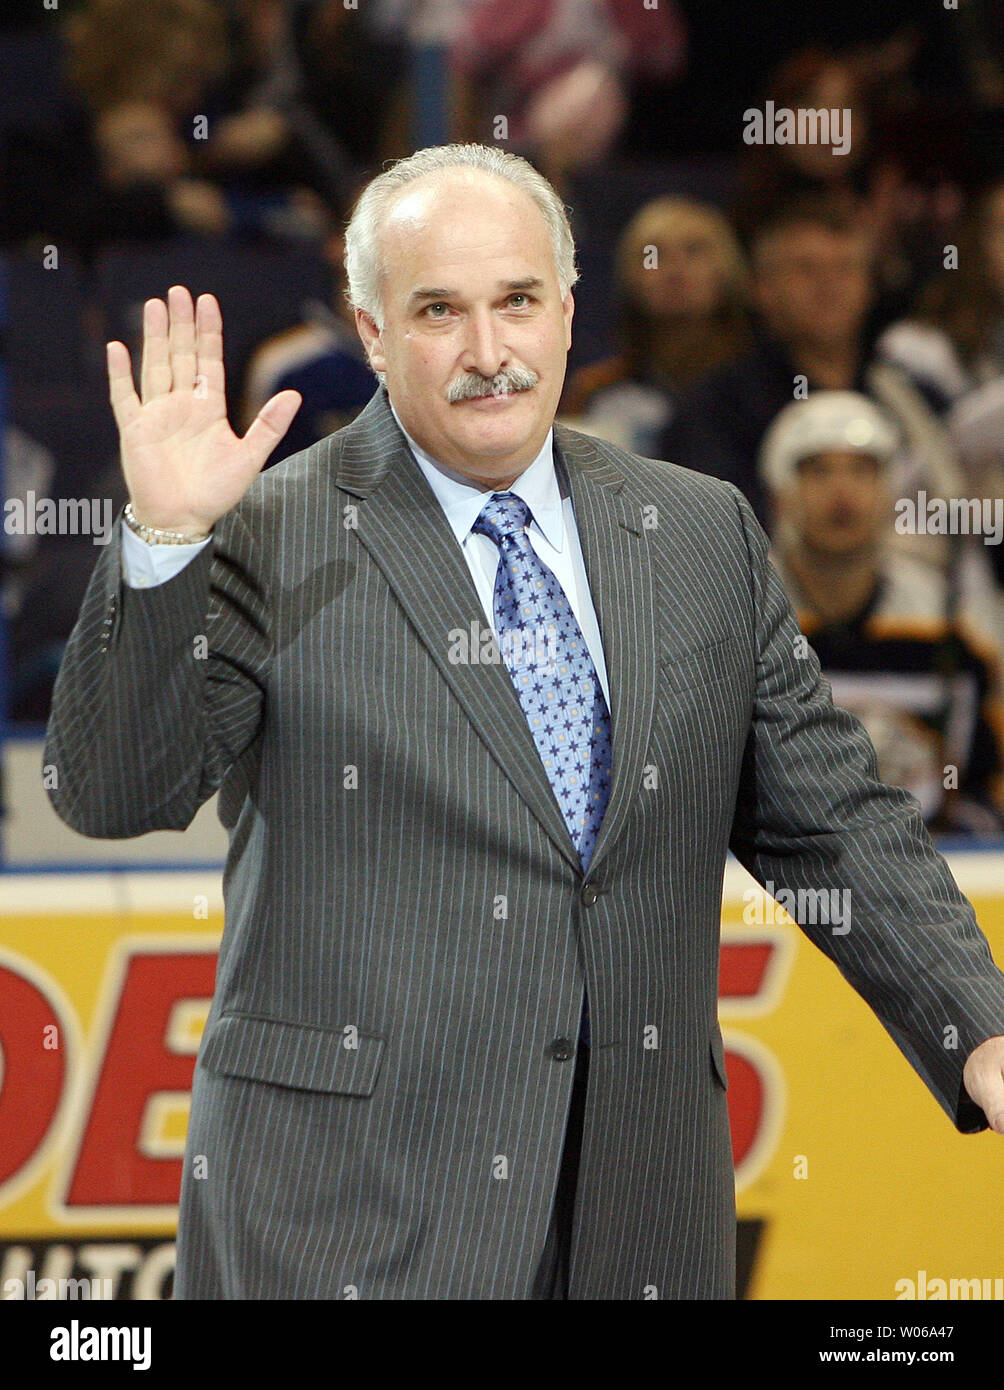 St. Louis Blues President John Davidson waves to the fans as he is